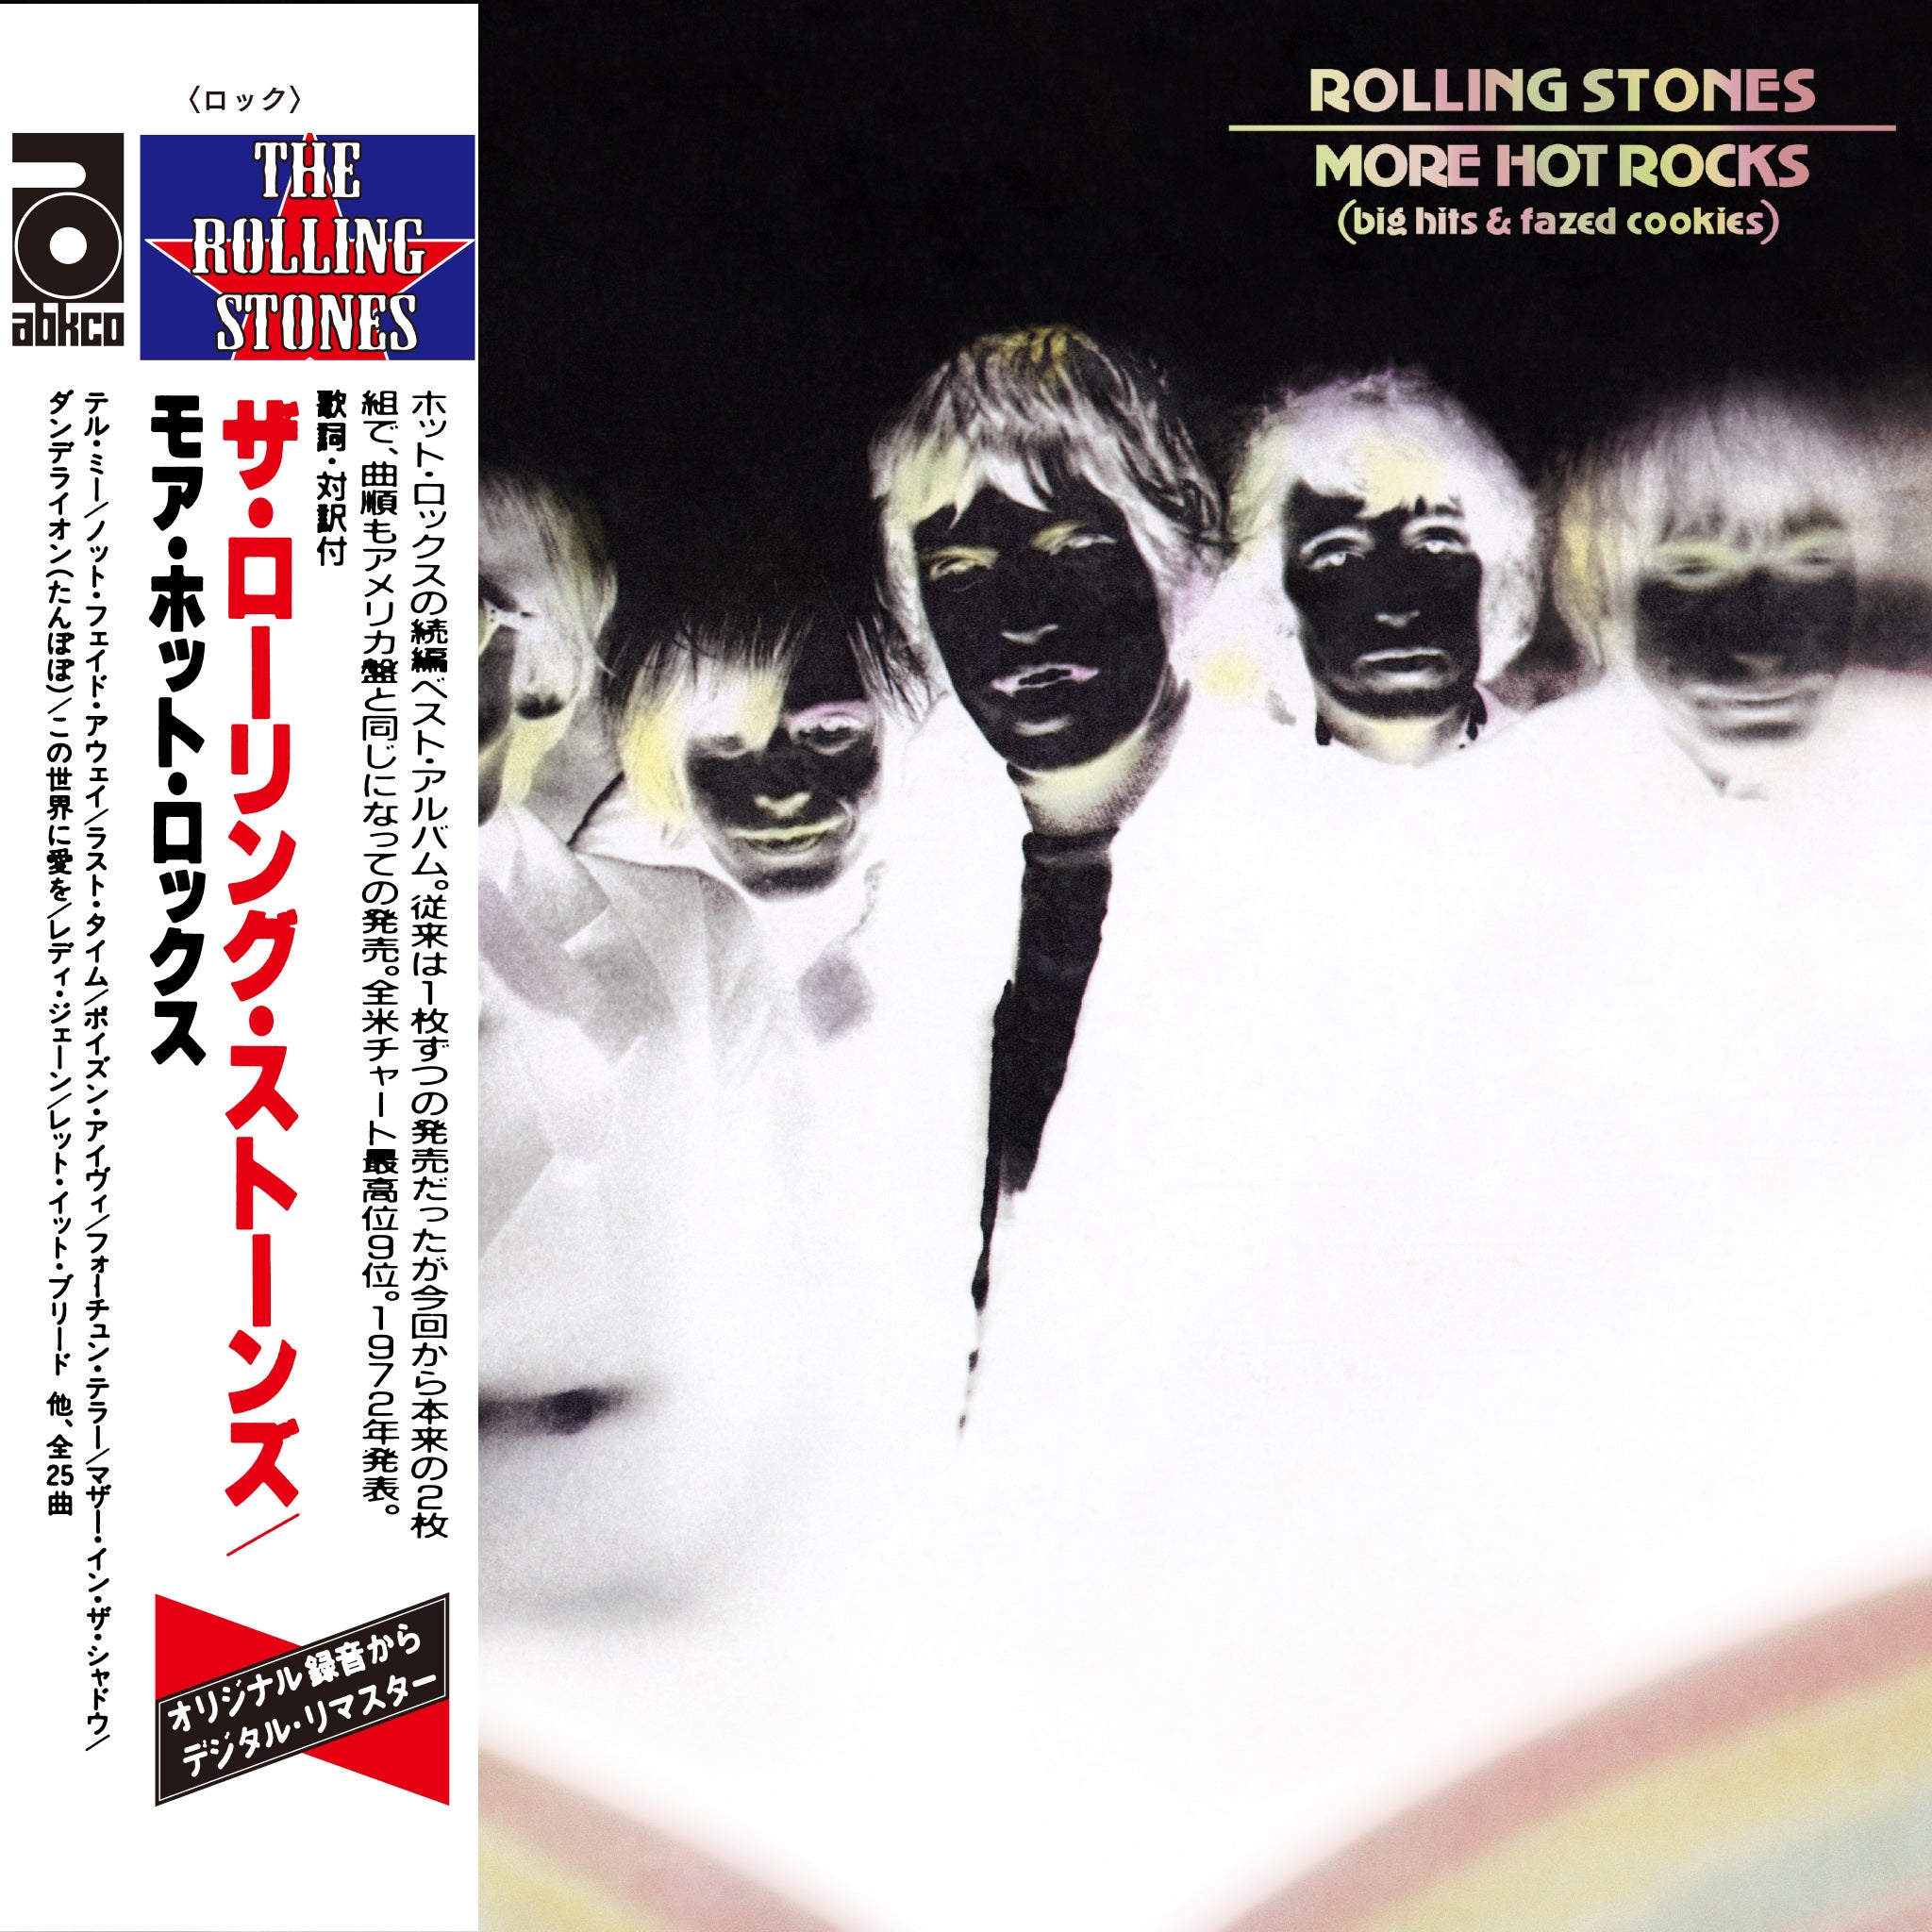 The Rolling Stones - More Hot Rocks: Exclusive Limited Edition SHM-2CD Export